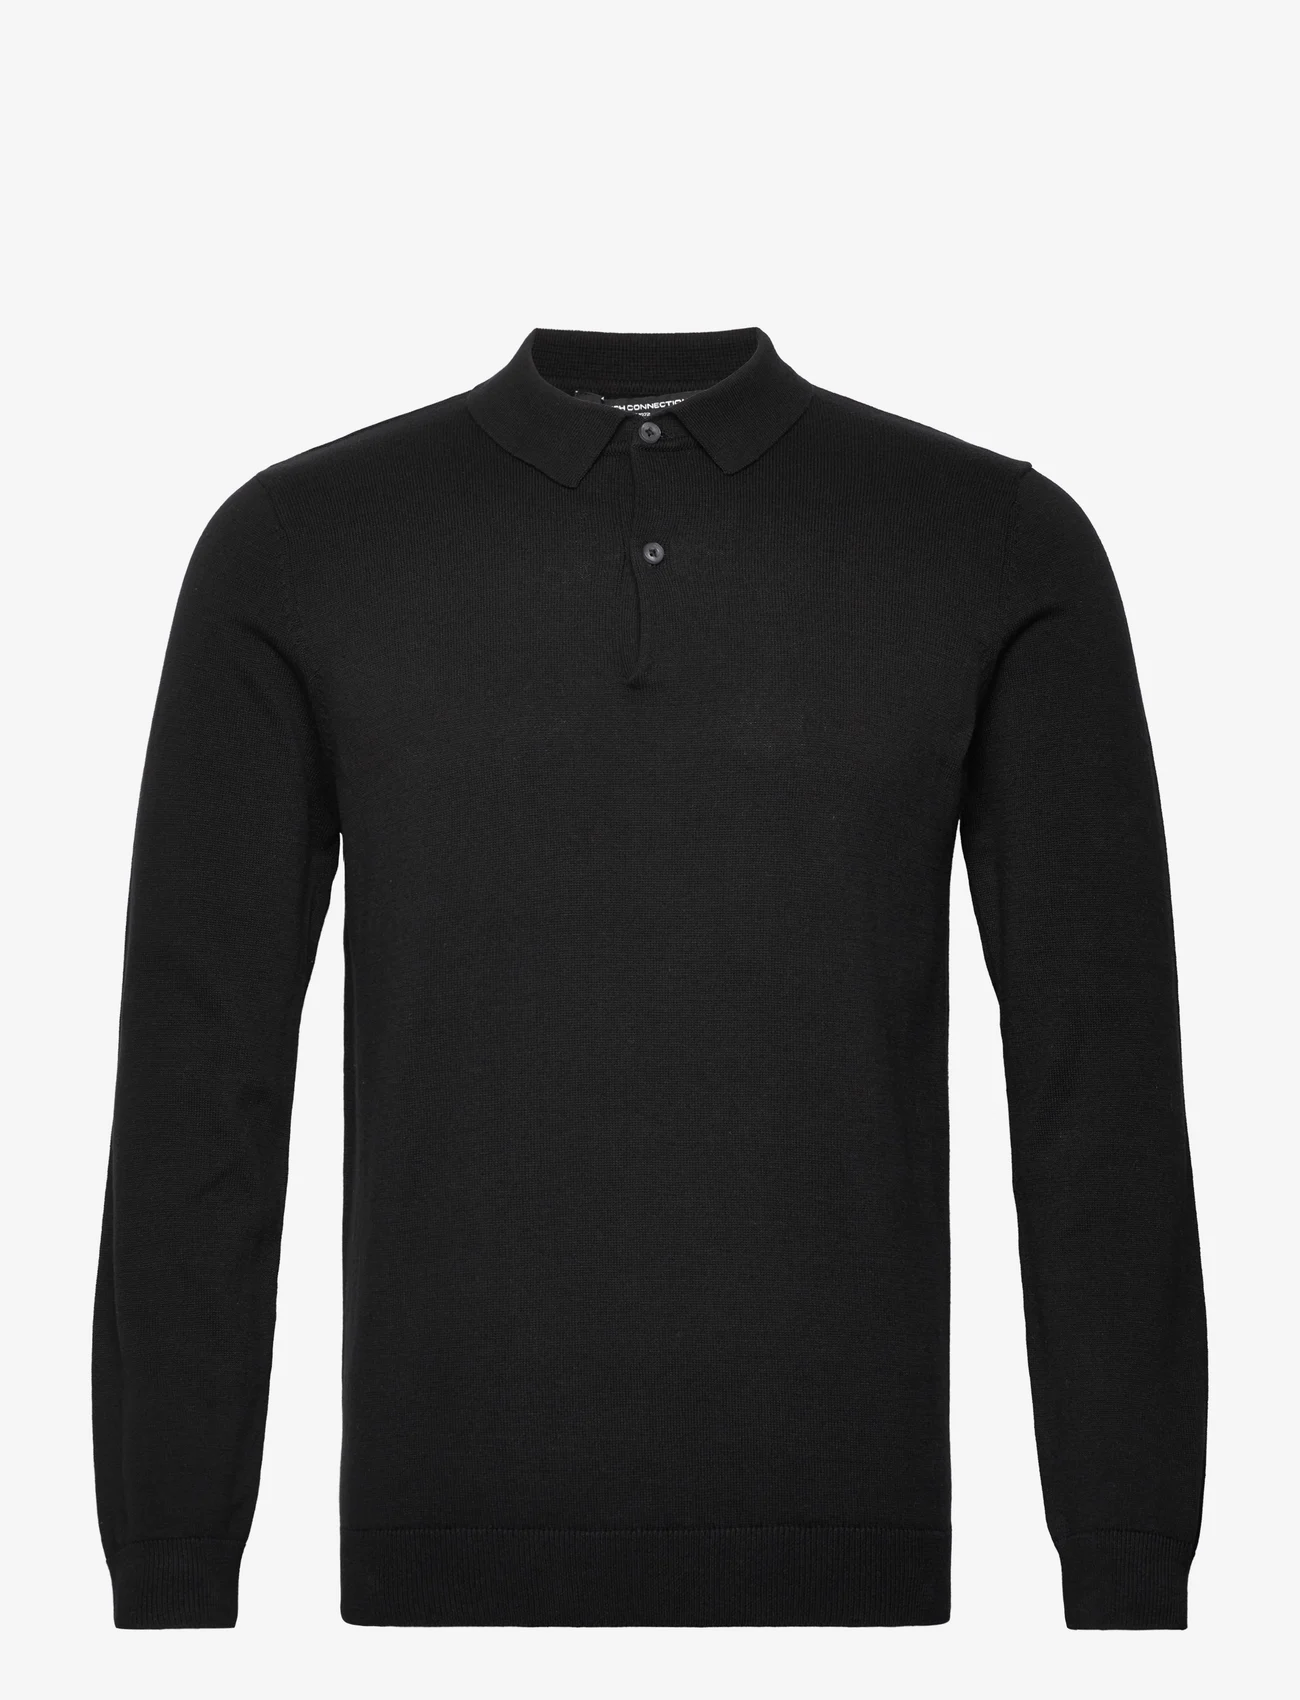 French Connection - RESORT LS POLO - lange mouwen - black - 0